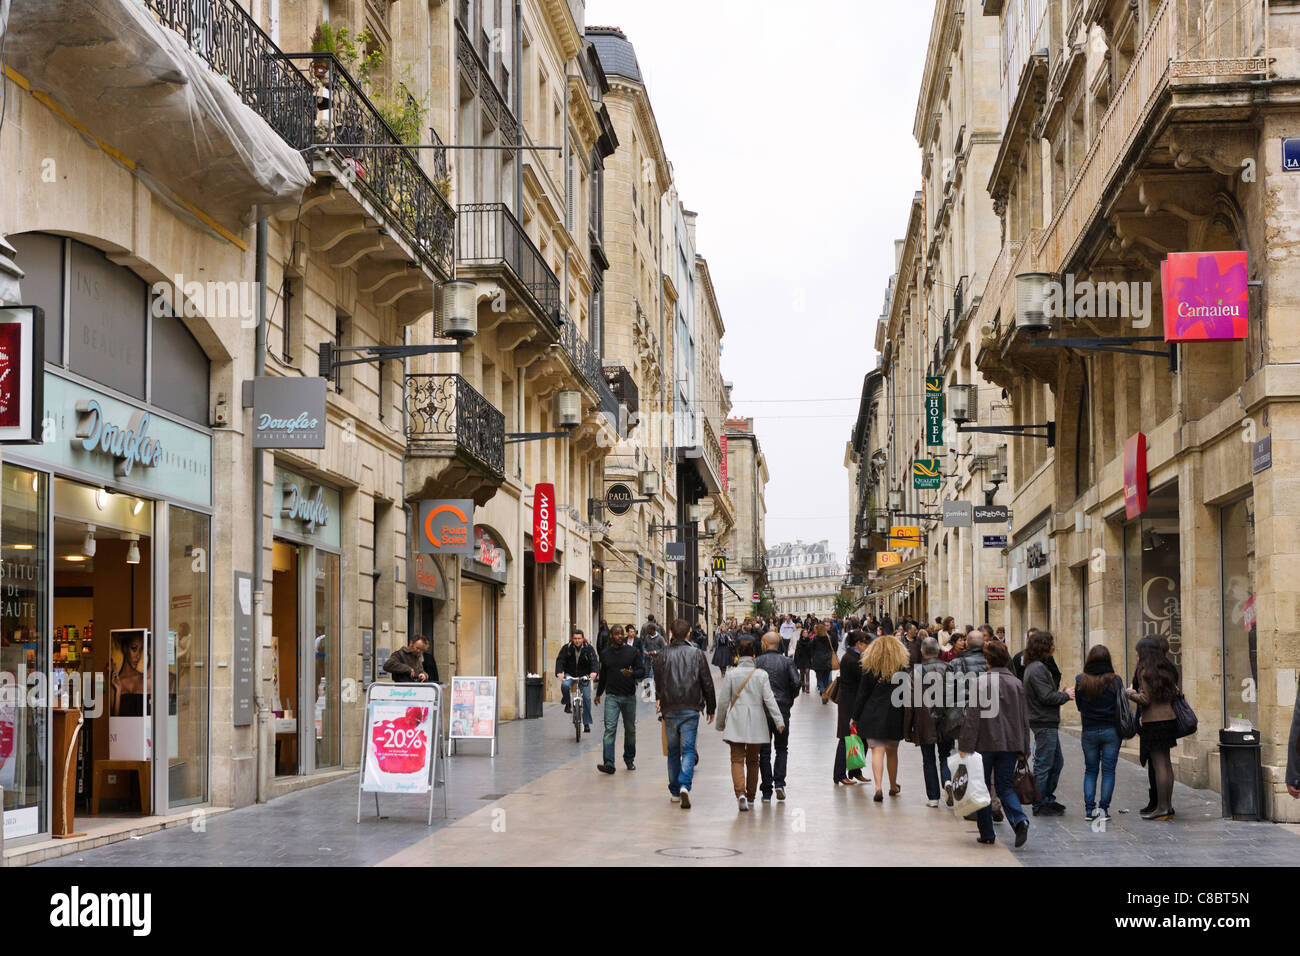 Rue St Catherine High Resolution Stock Photography and Images - Alamy